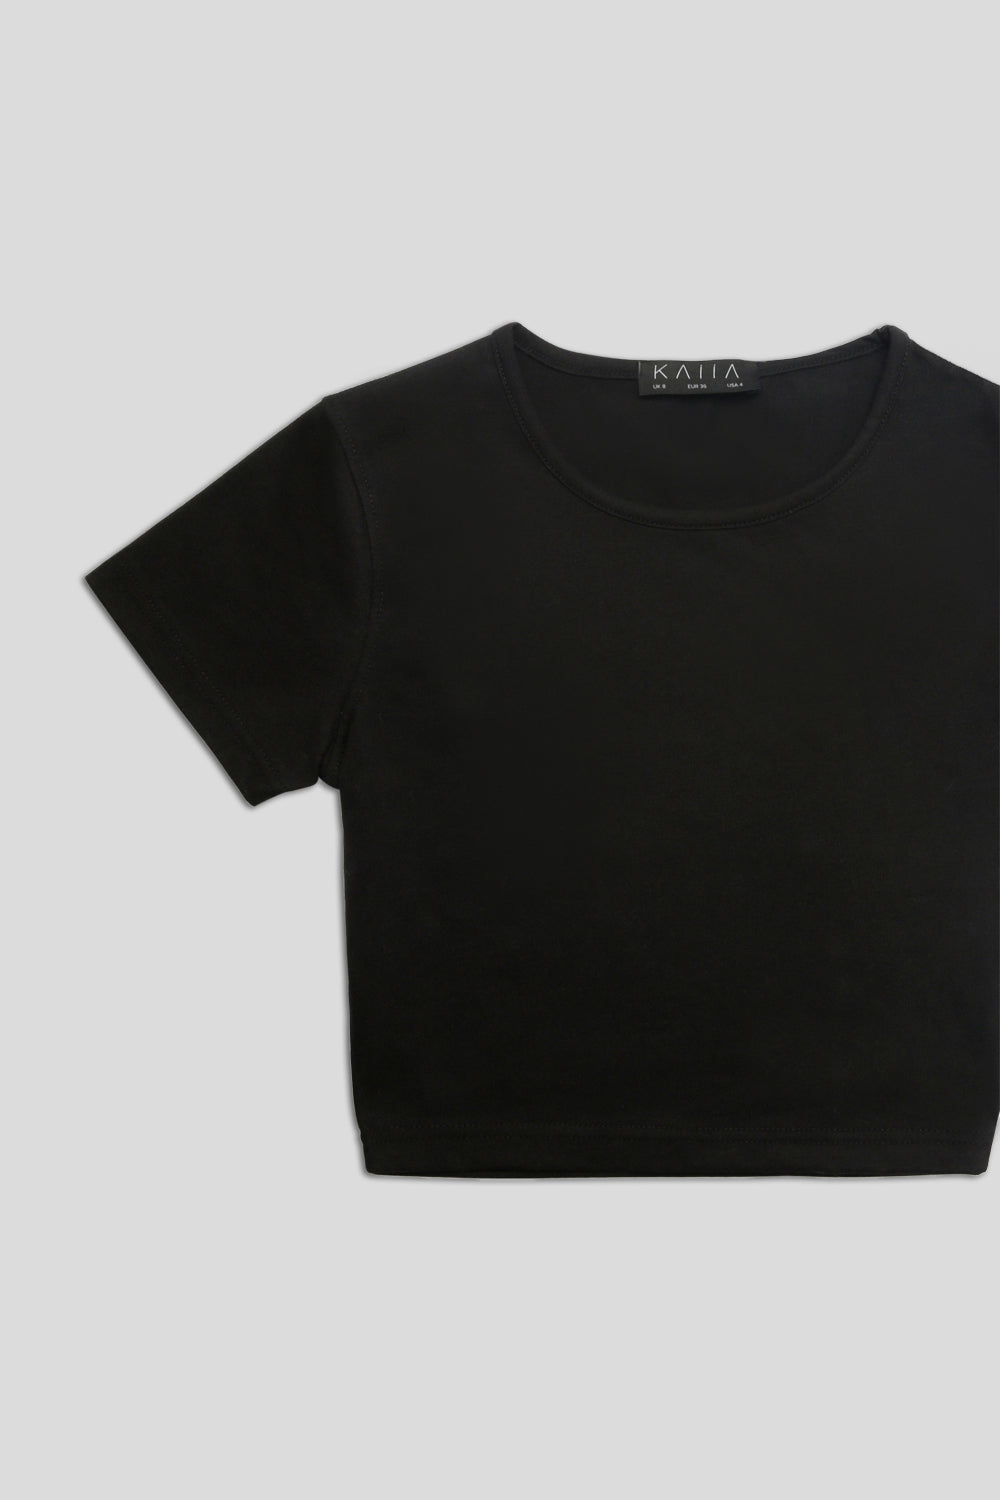 Fitted T-Shirt Black UK 14